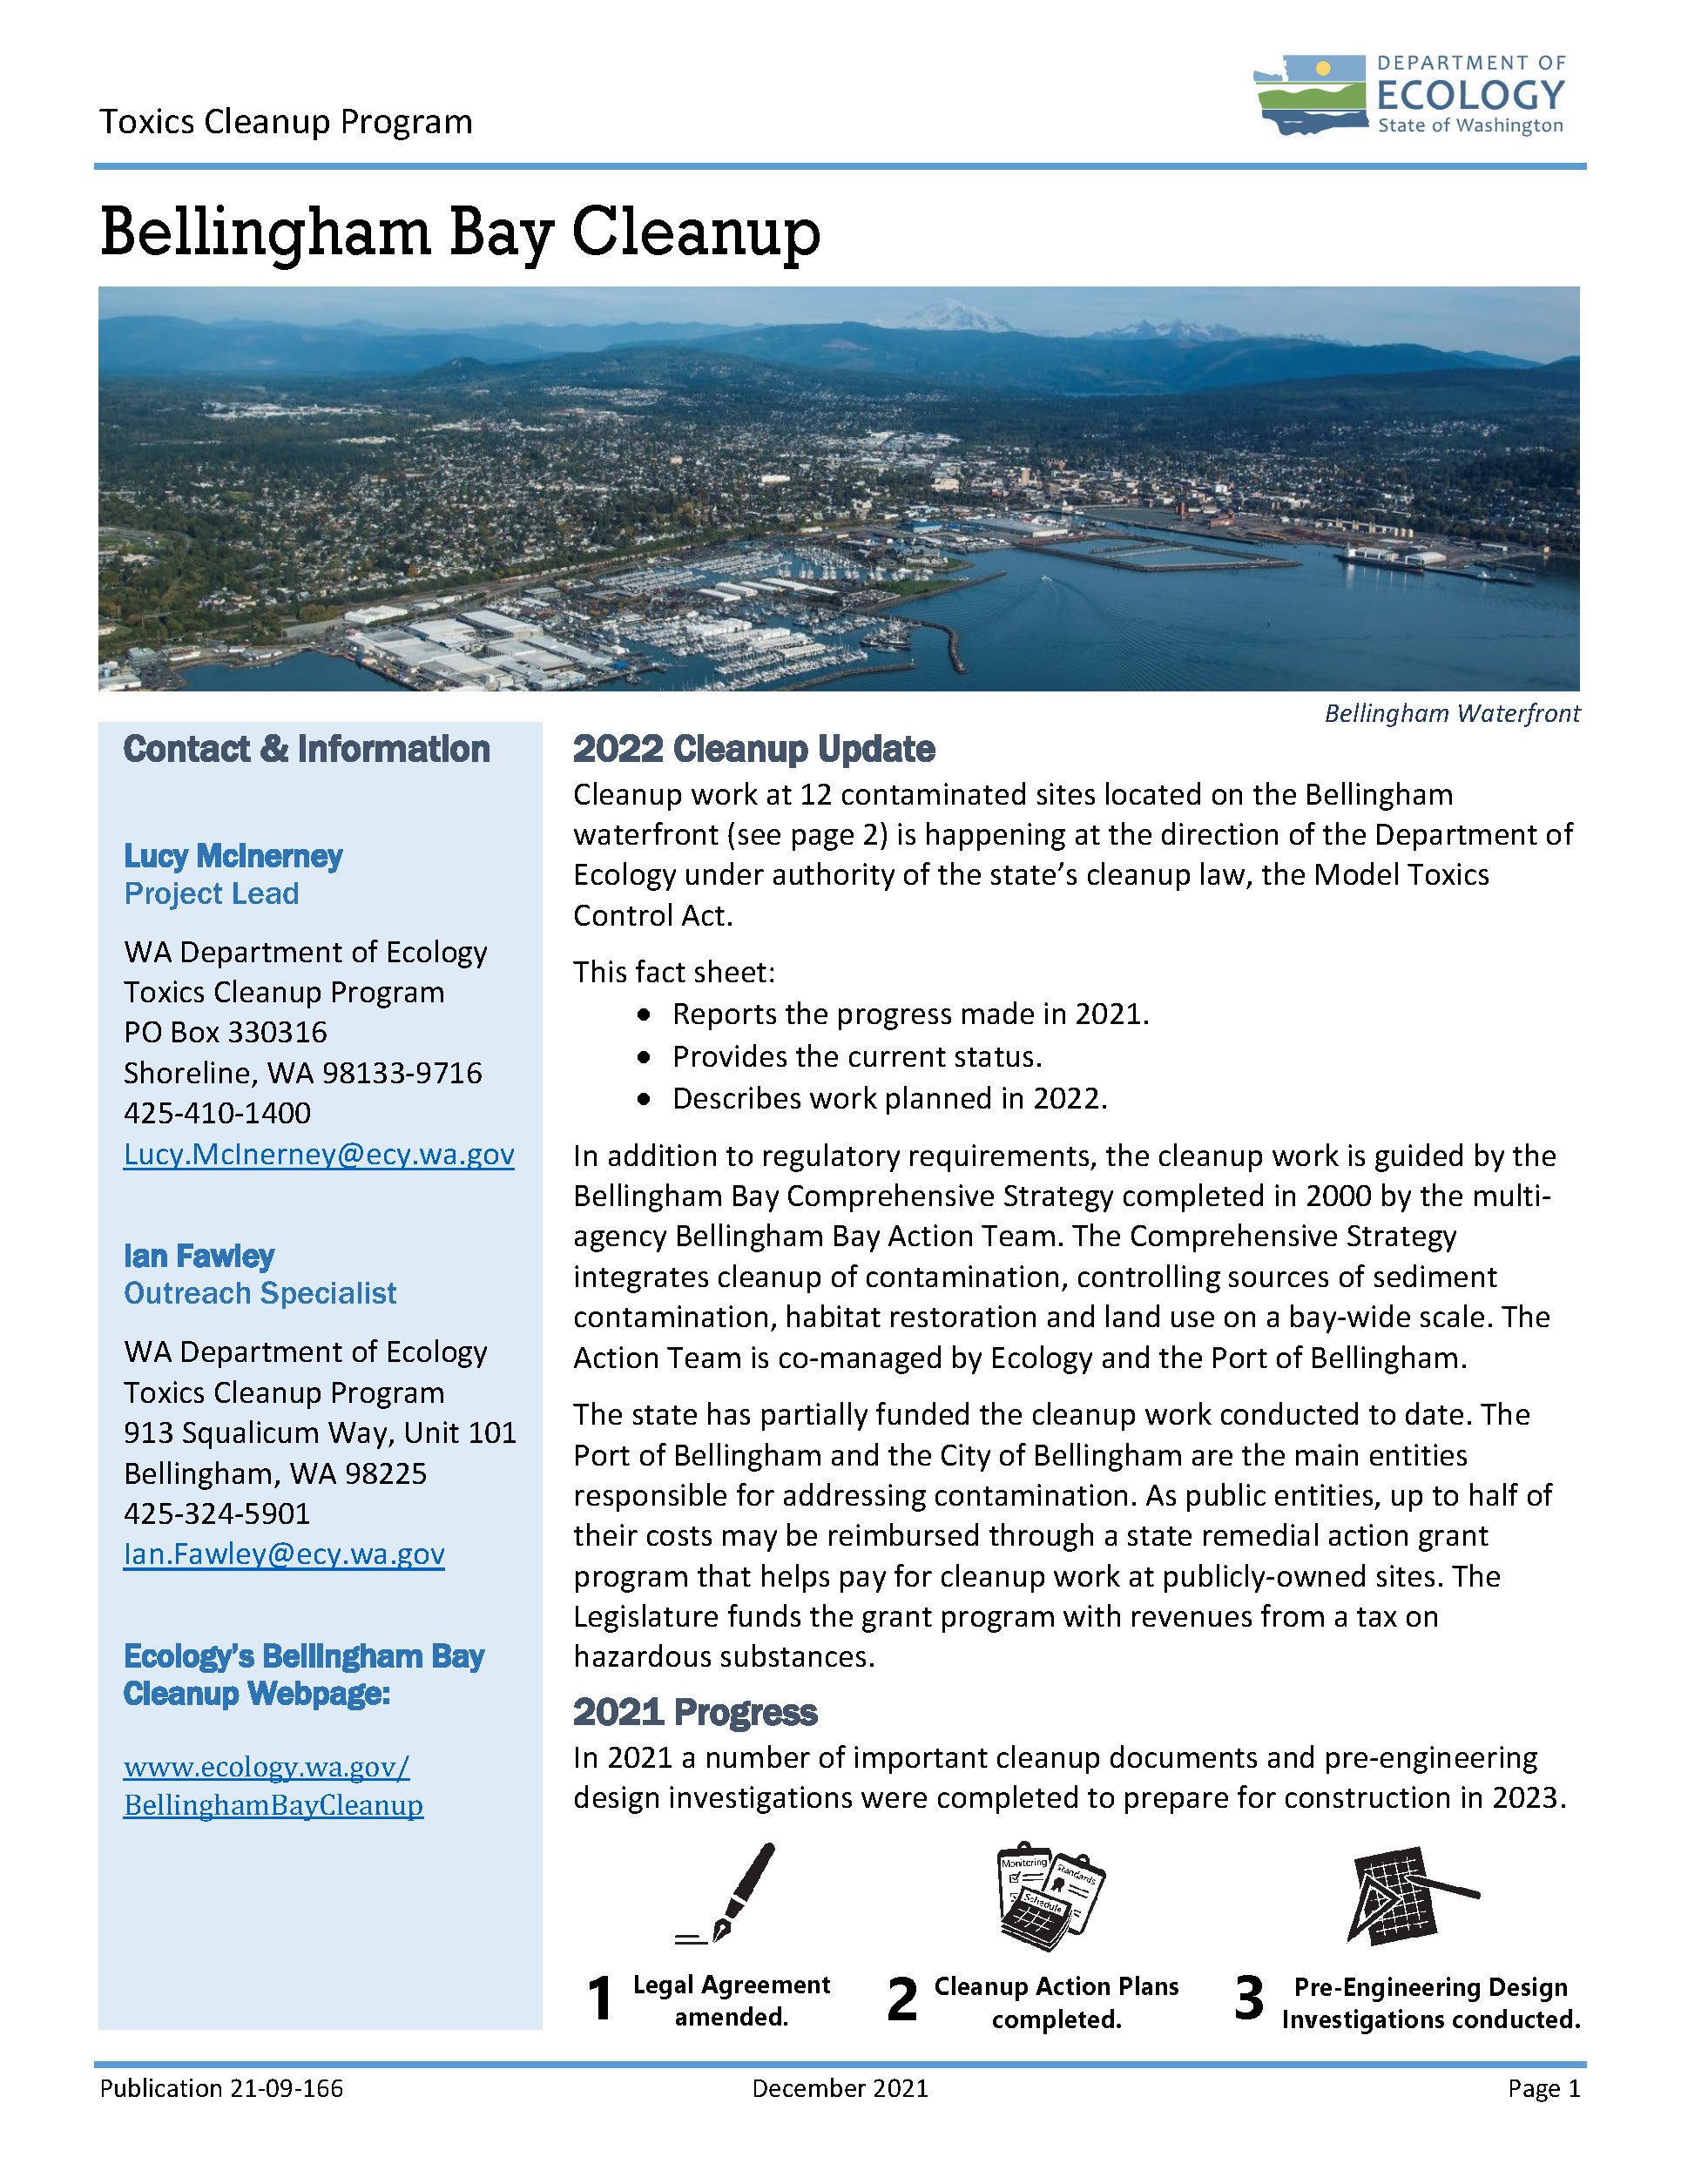 Fact sheet page with text and Bellingham Bay aerial image